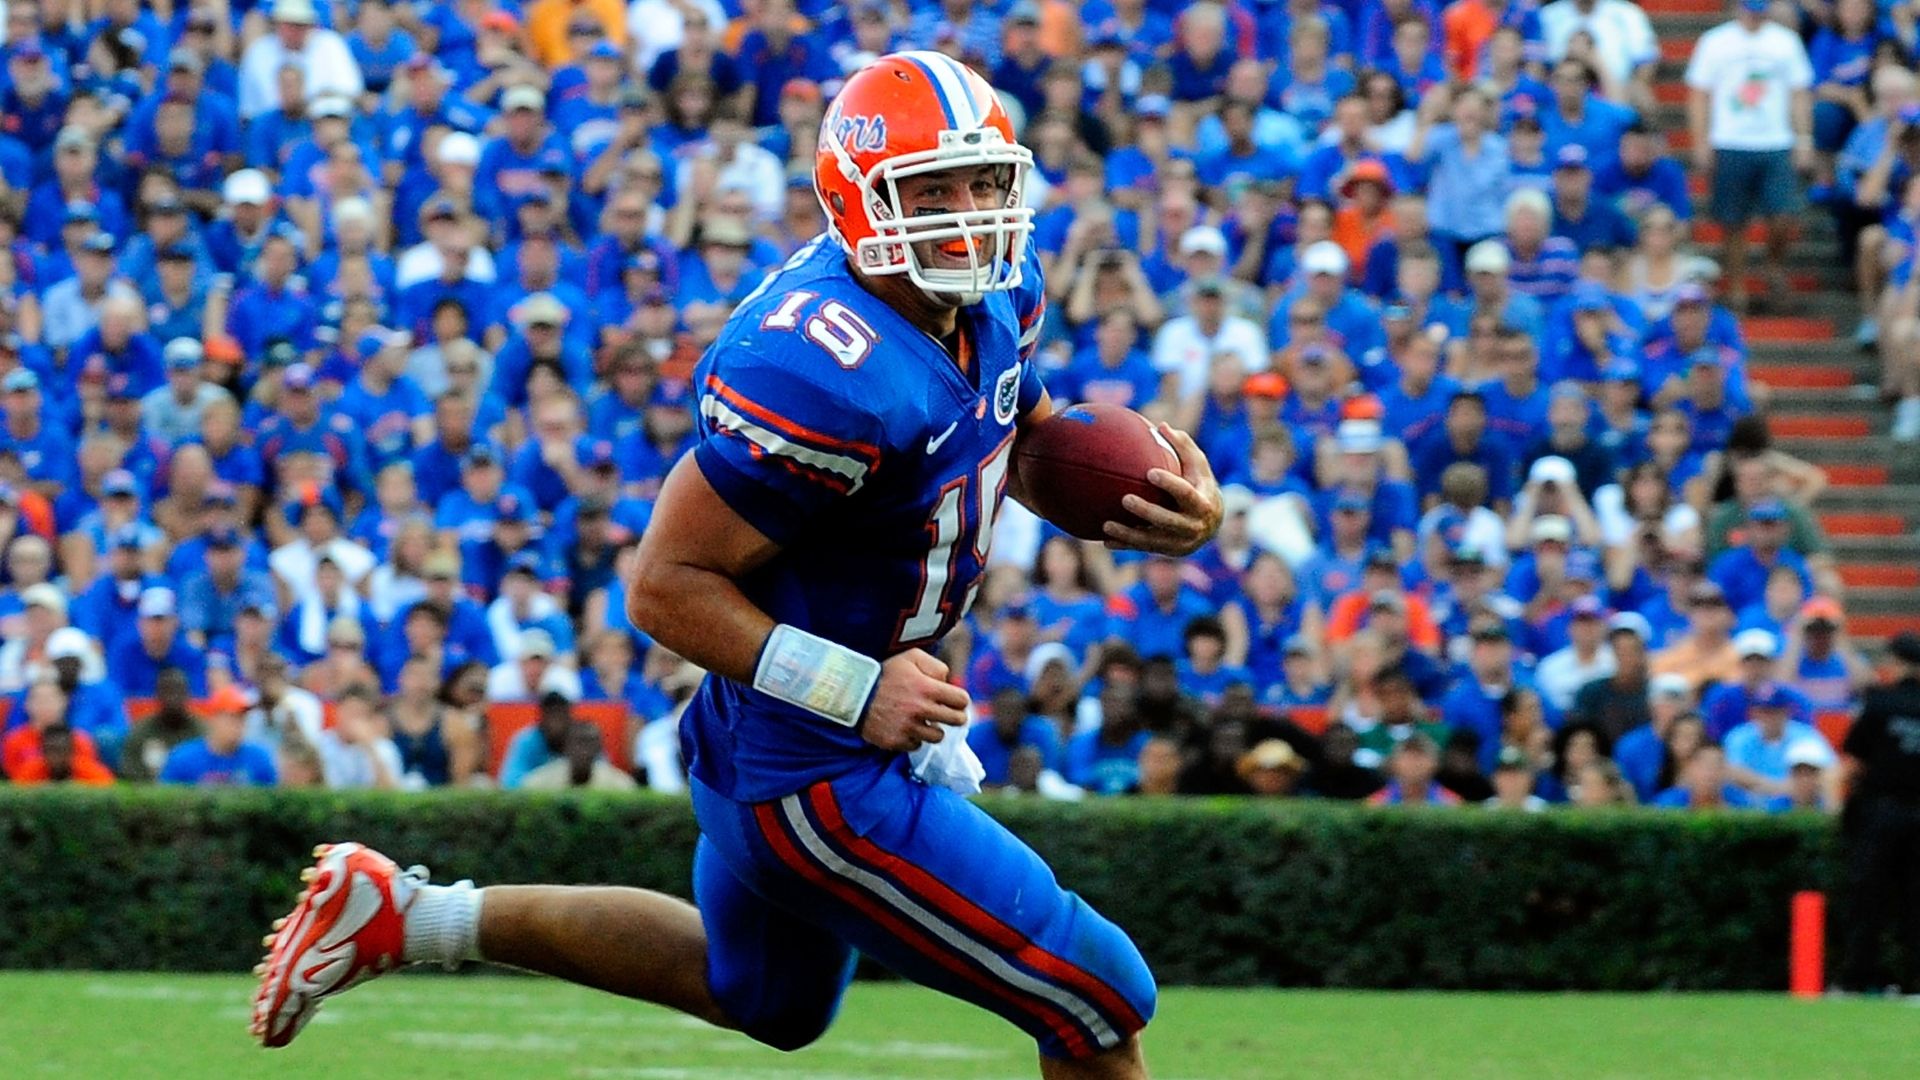 Tebow left a huge legacy at Florida